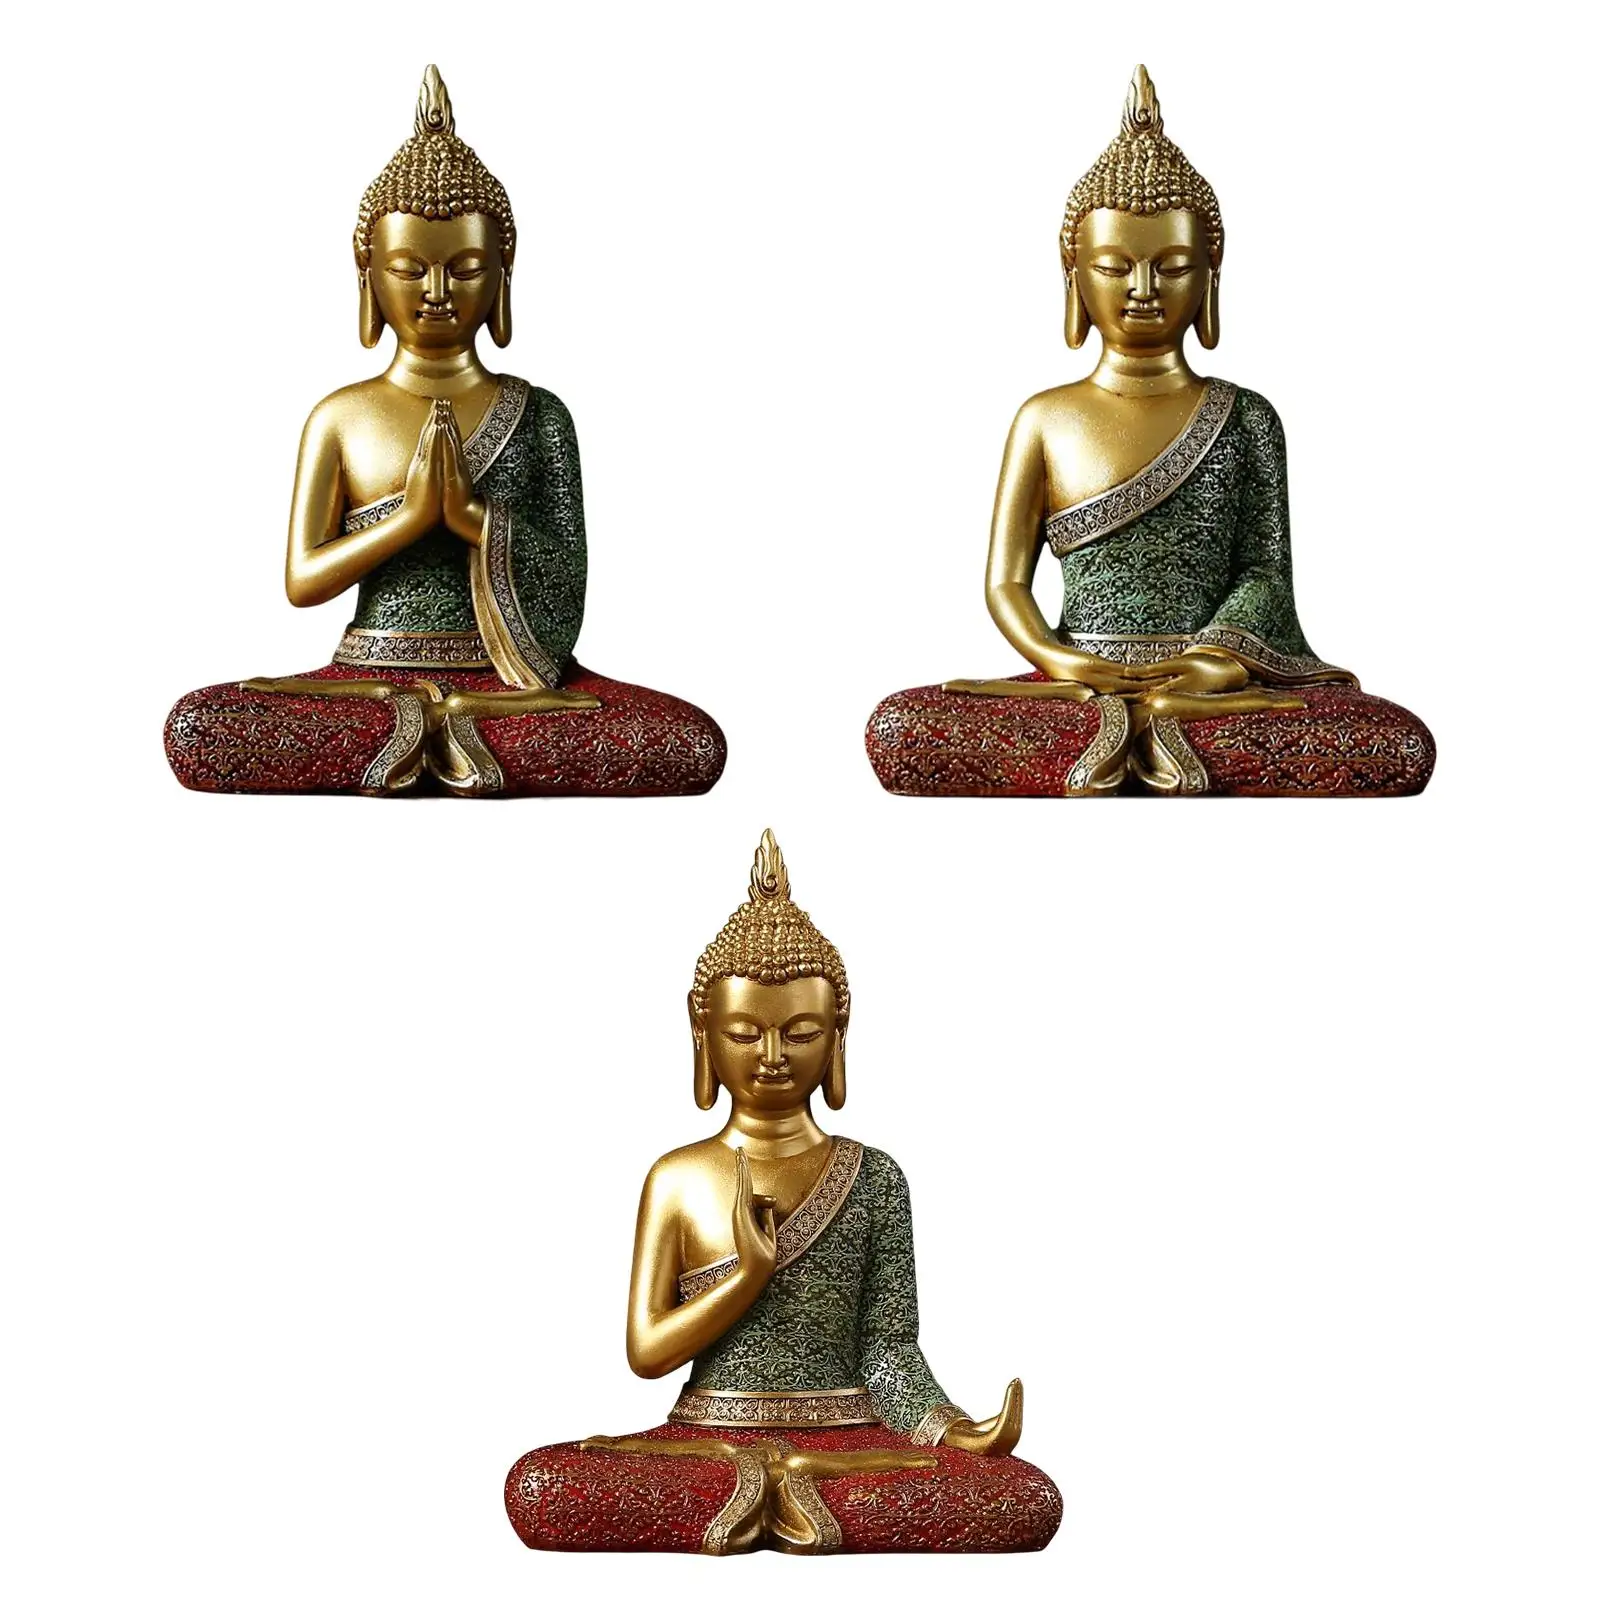 Buddha Statue Religious Sculpture Fengshui Decor for Home Office Decor Gift